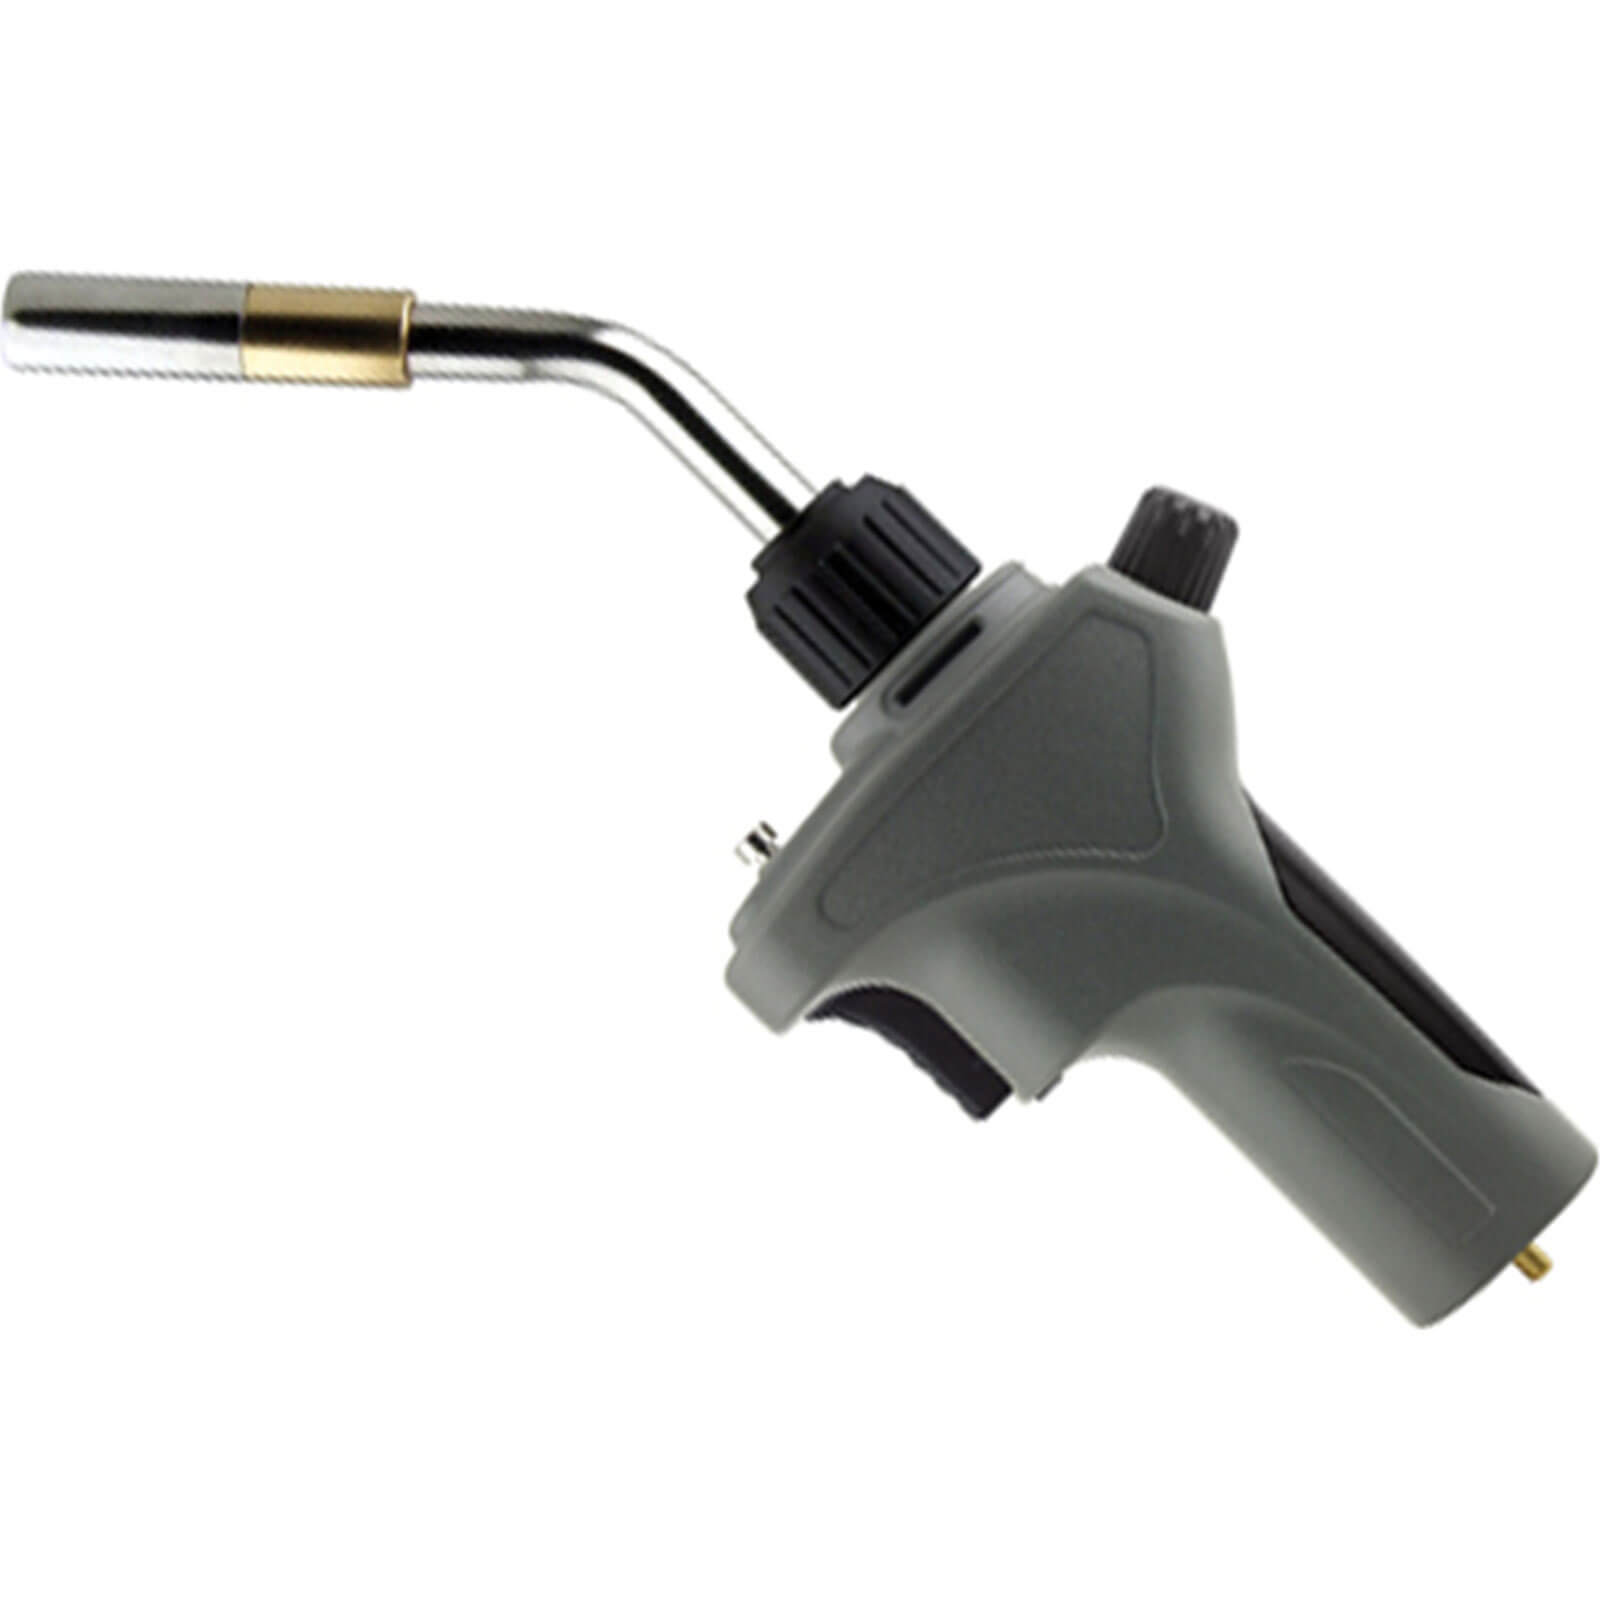 Monument 3475G Pro Gas Blow Torch